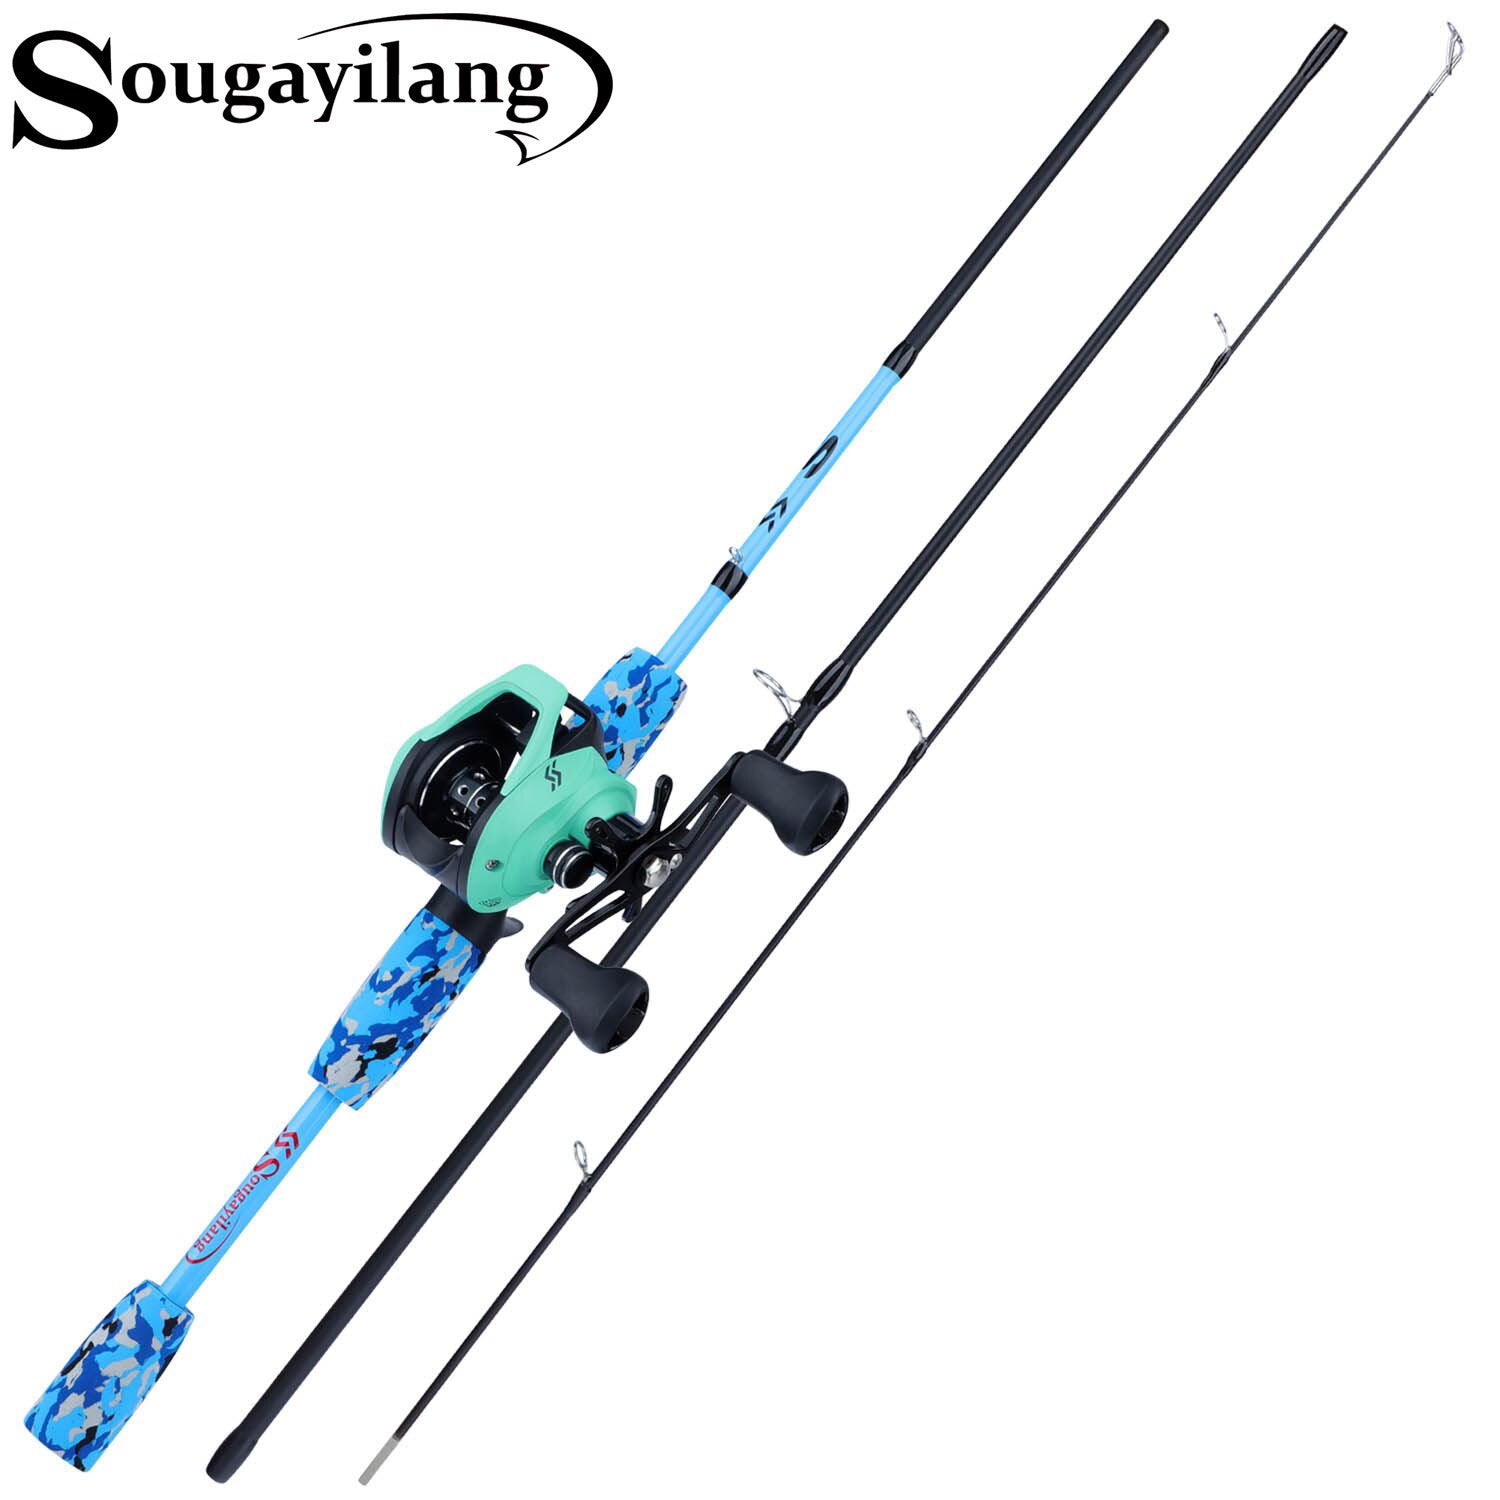 Sougayilang Fishing Rods Reels Full Kit Portable Carbon 4 Pieces Baitcaster  Fishing Pole with Low Profile 18BB Baitcasting Reel Portable Carrier Bag